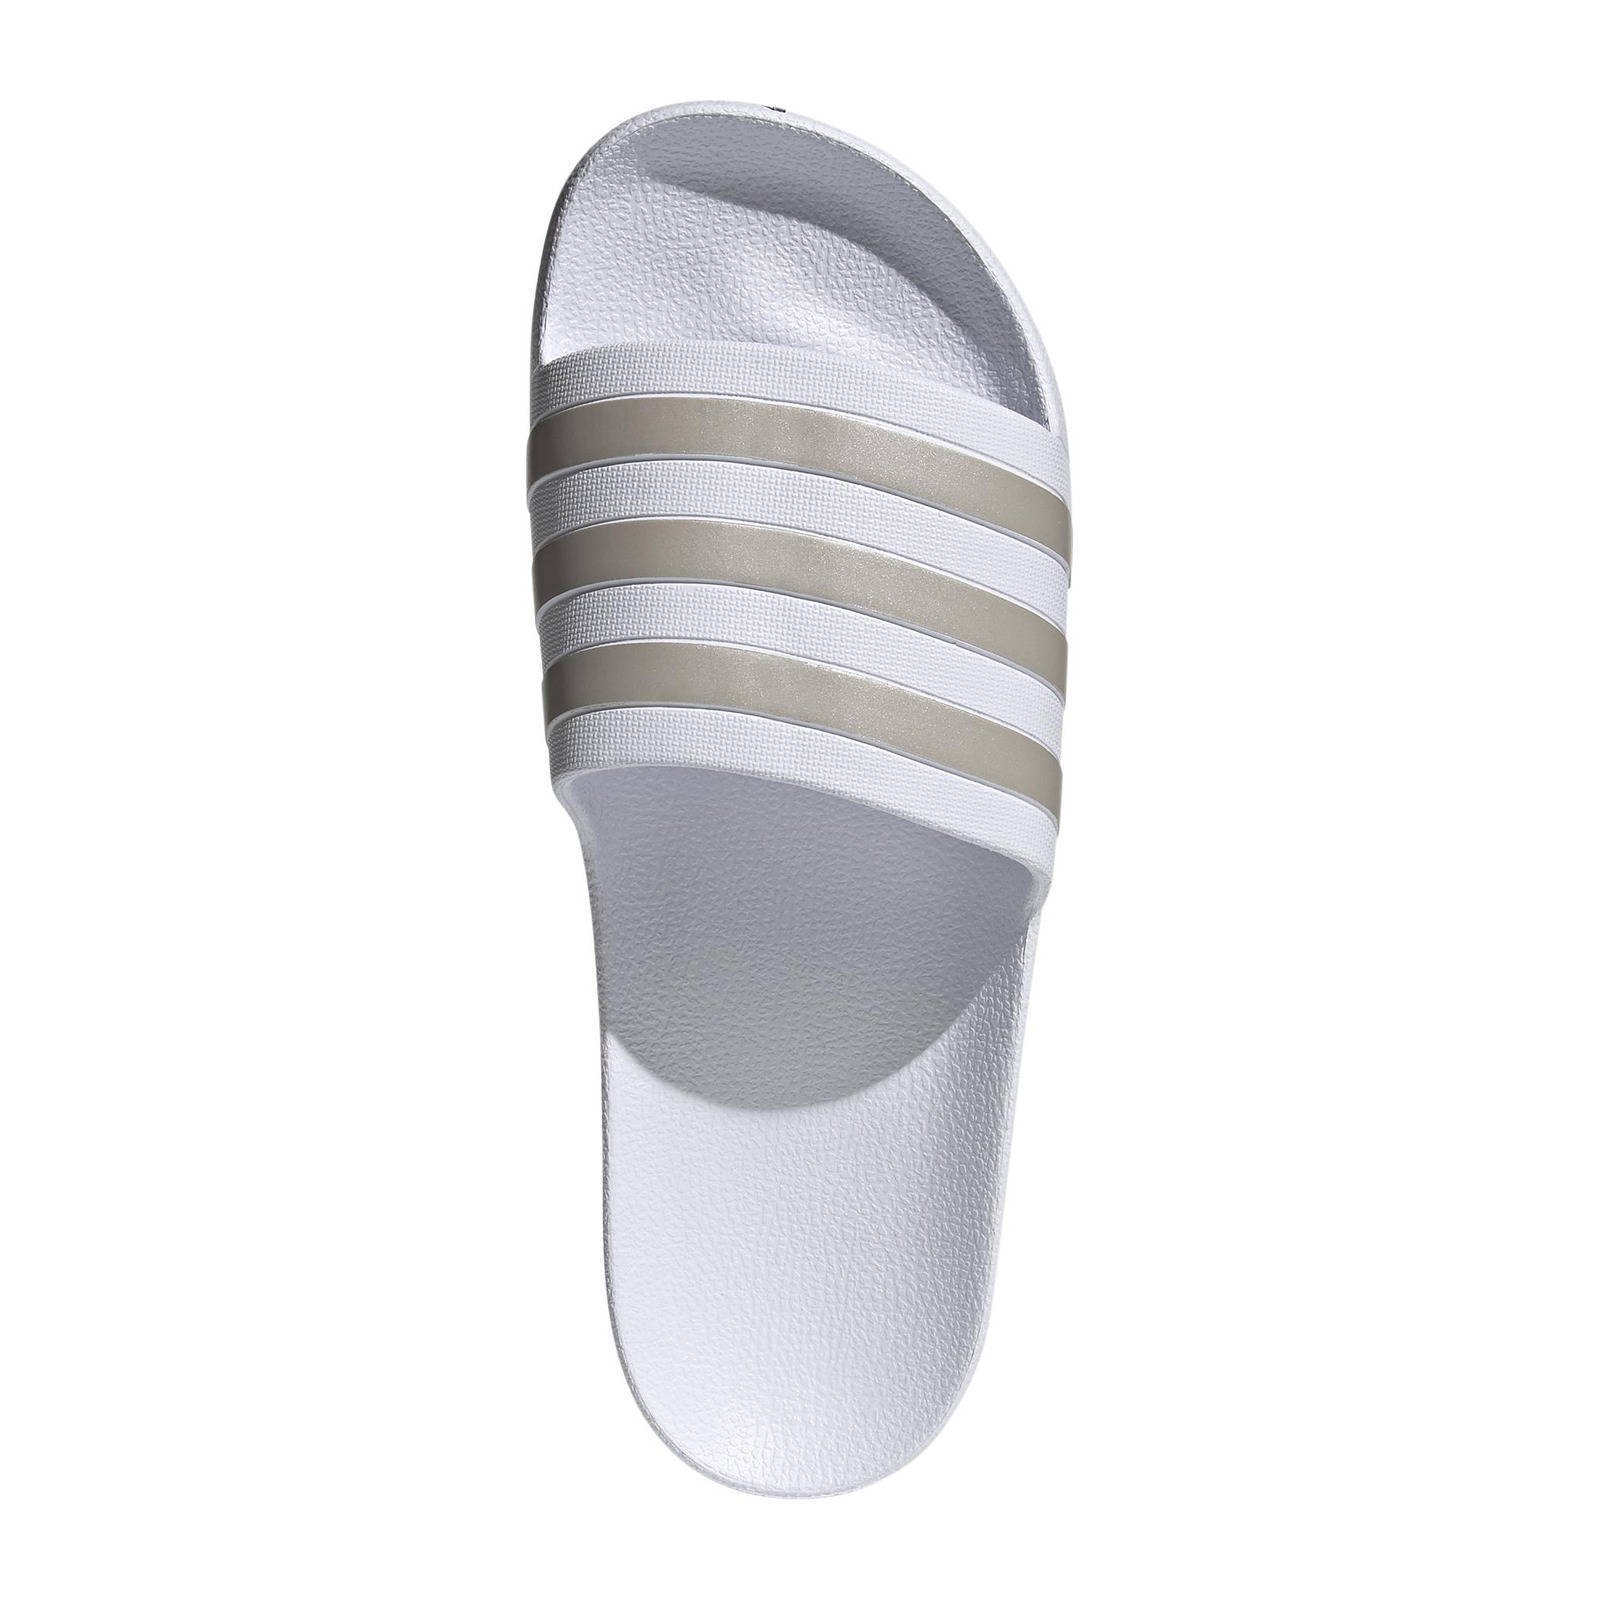 witte adidas slippers Off 57% - www.bashhguidelines.org